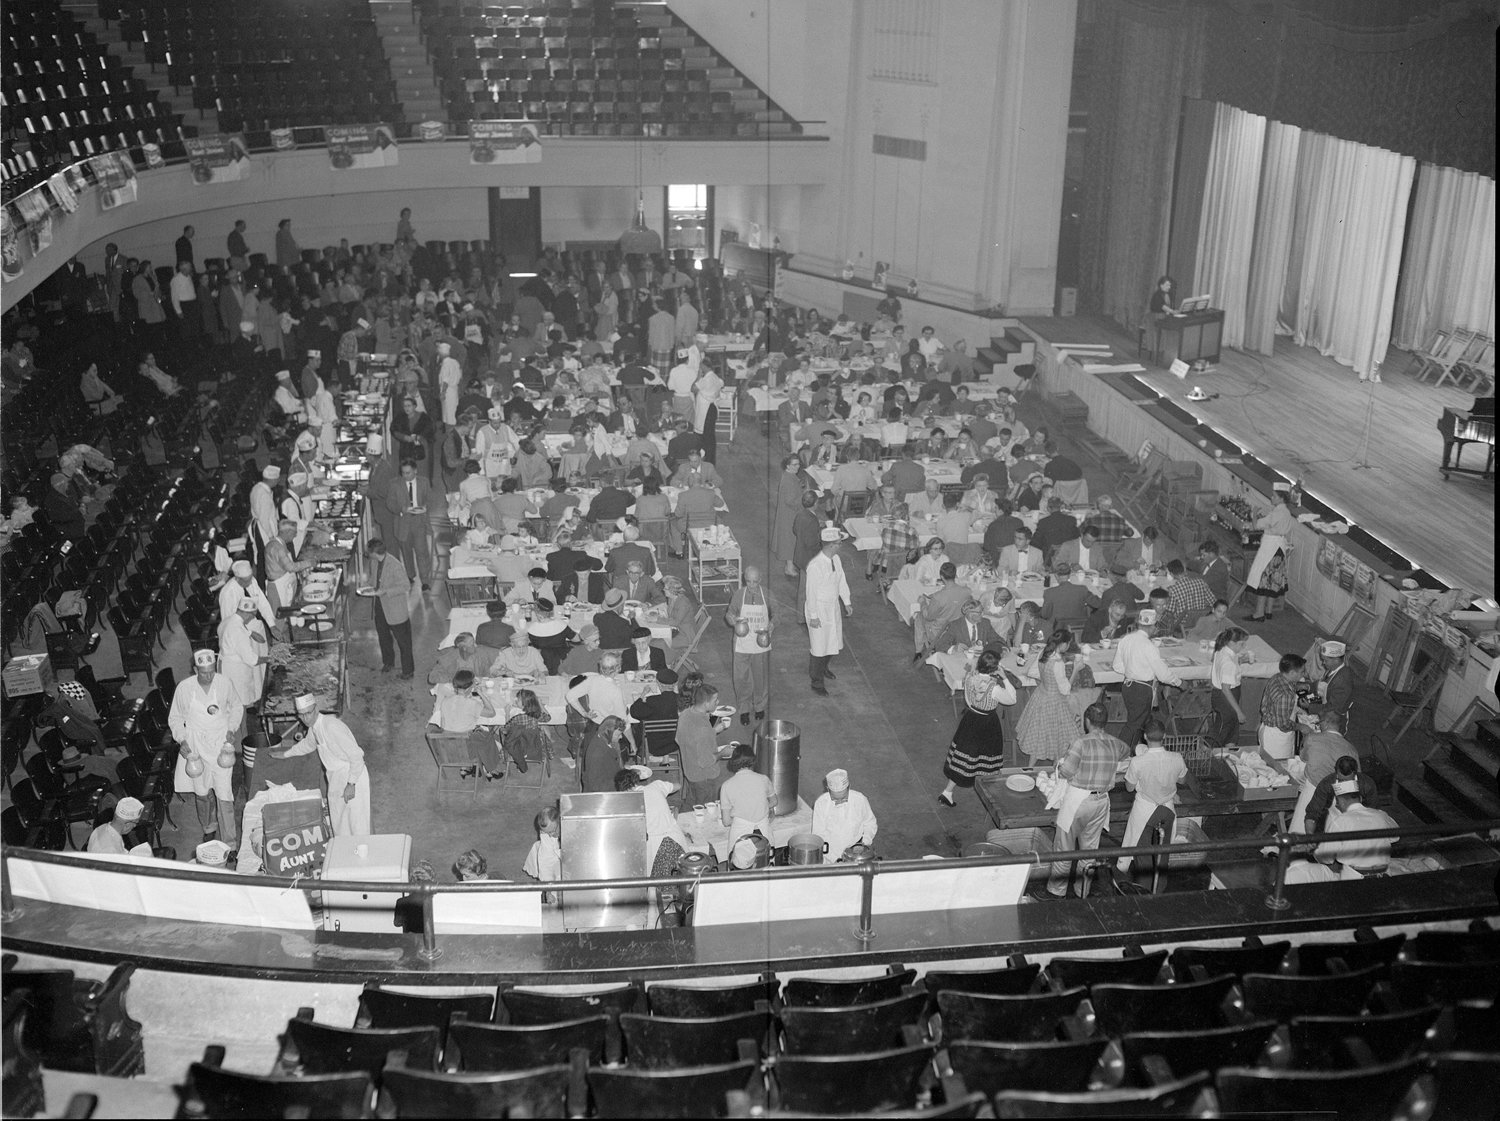 Kiwanis Pancake Day was held on the floor of the auditorium in 1957 at the Memorial Auditorium.